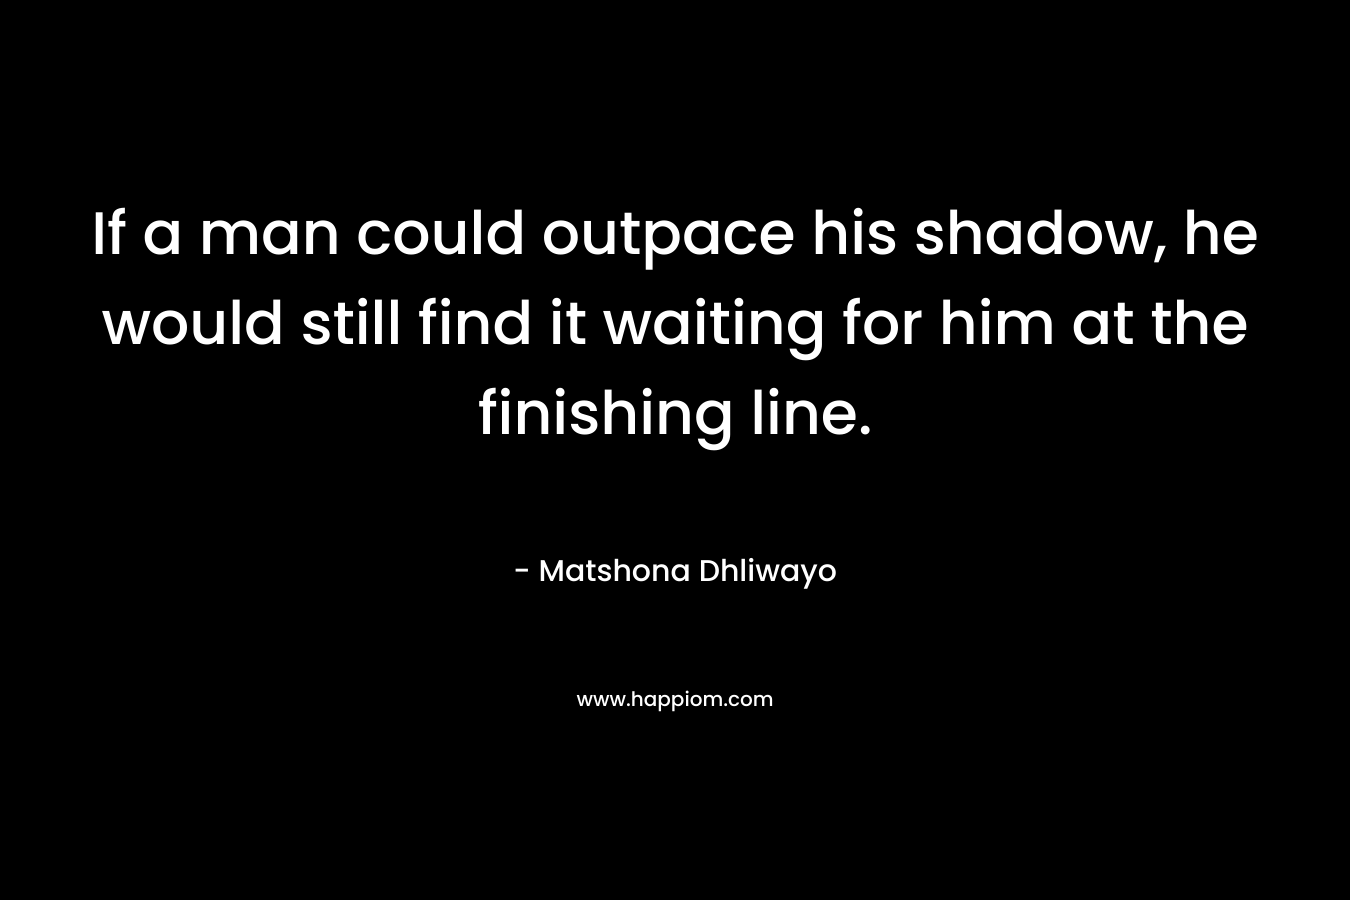 If a man could outpace his shadow, he would still find it waiting for him at the finishing line.